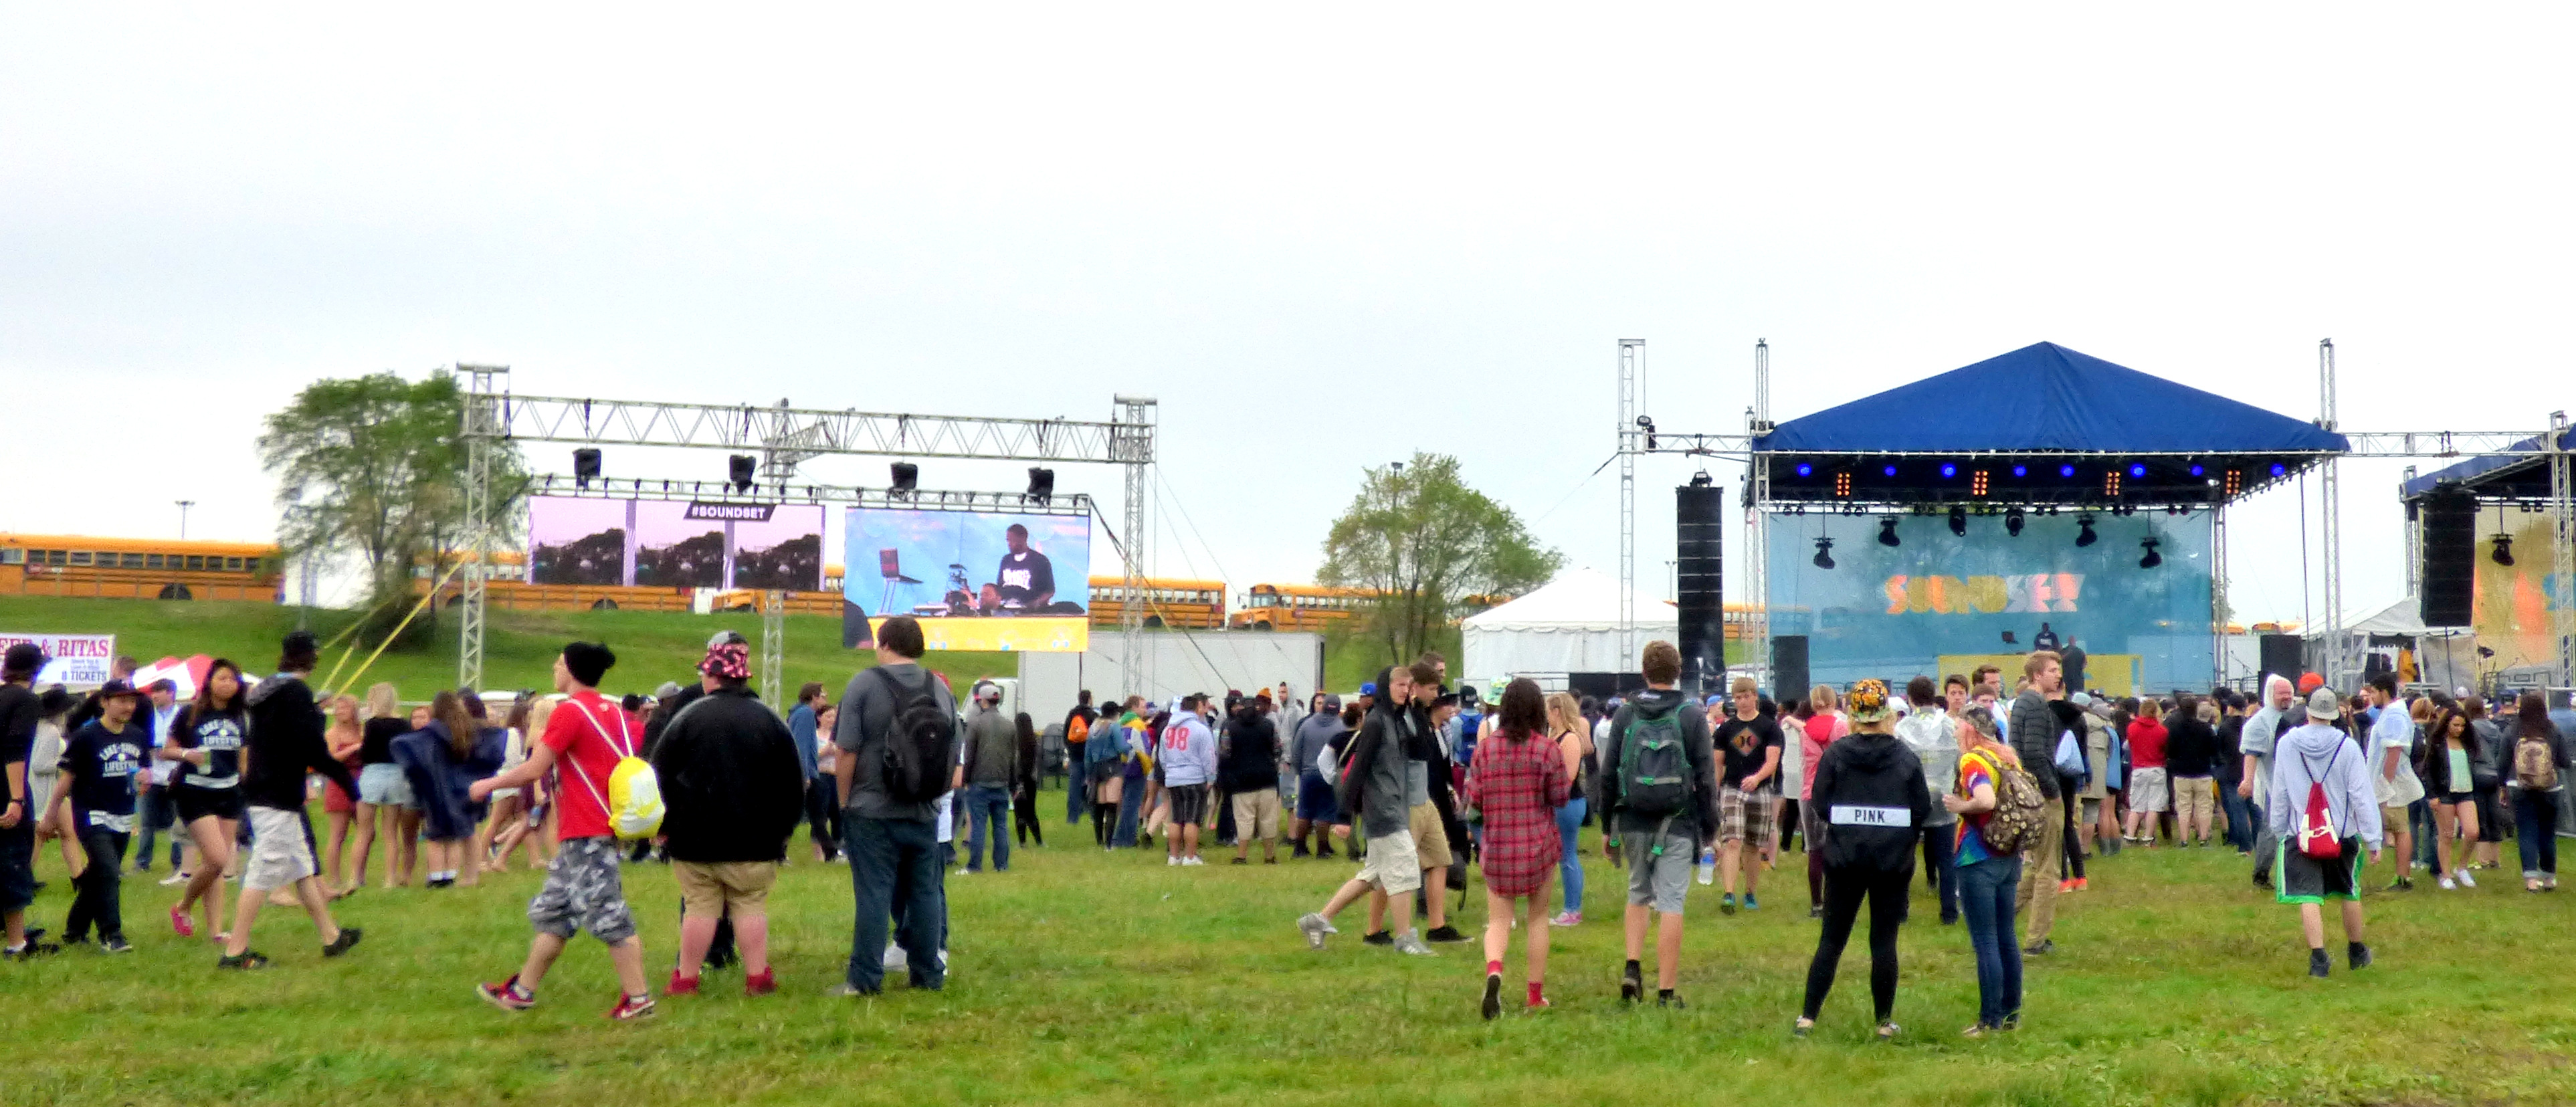 Soundset Crowd (Minnesota Connected)